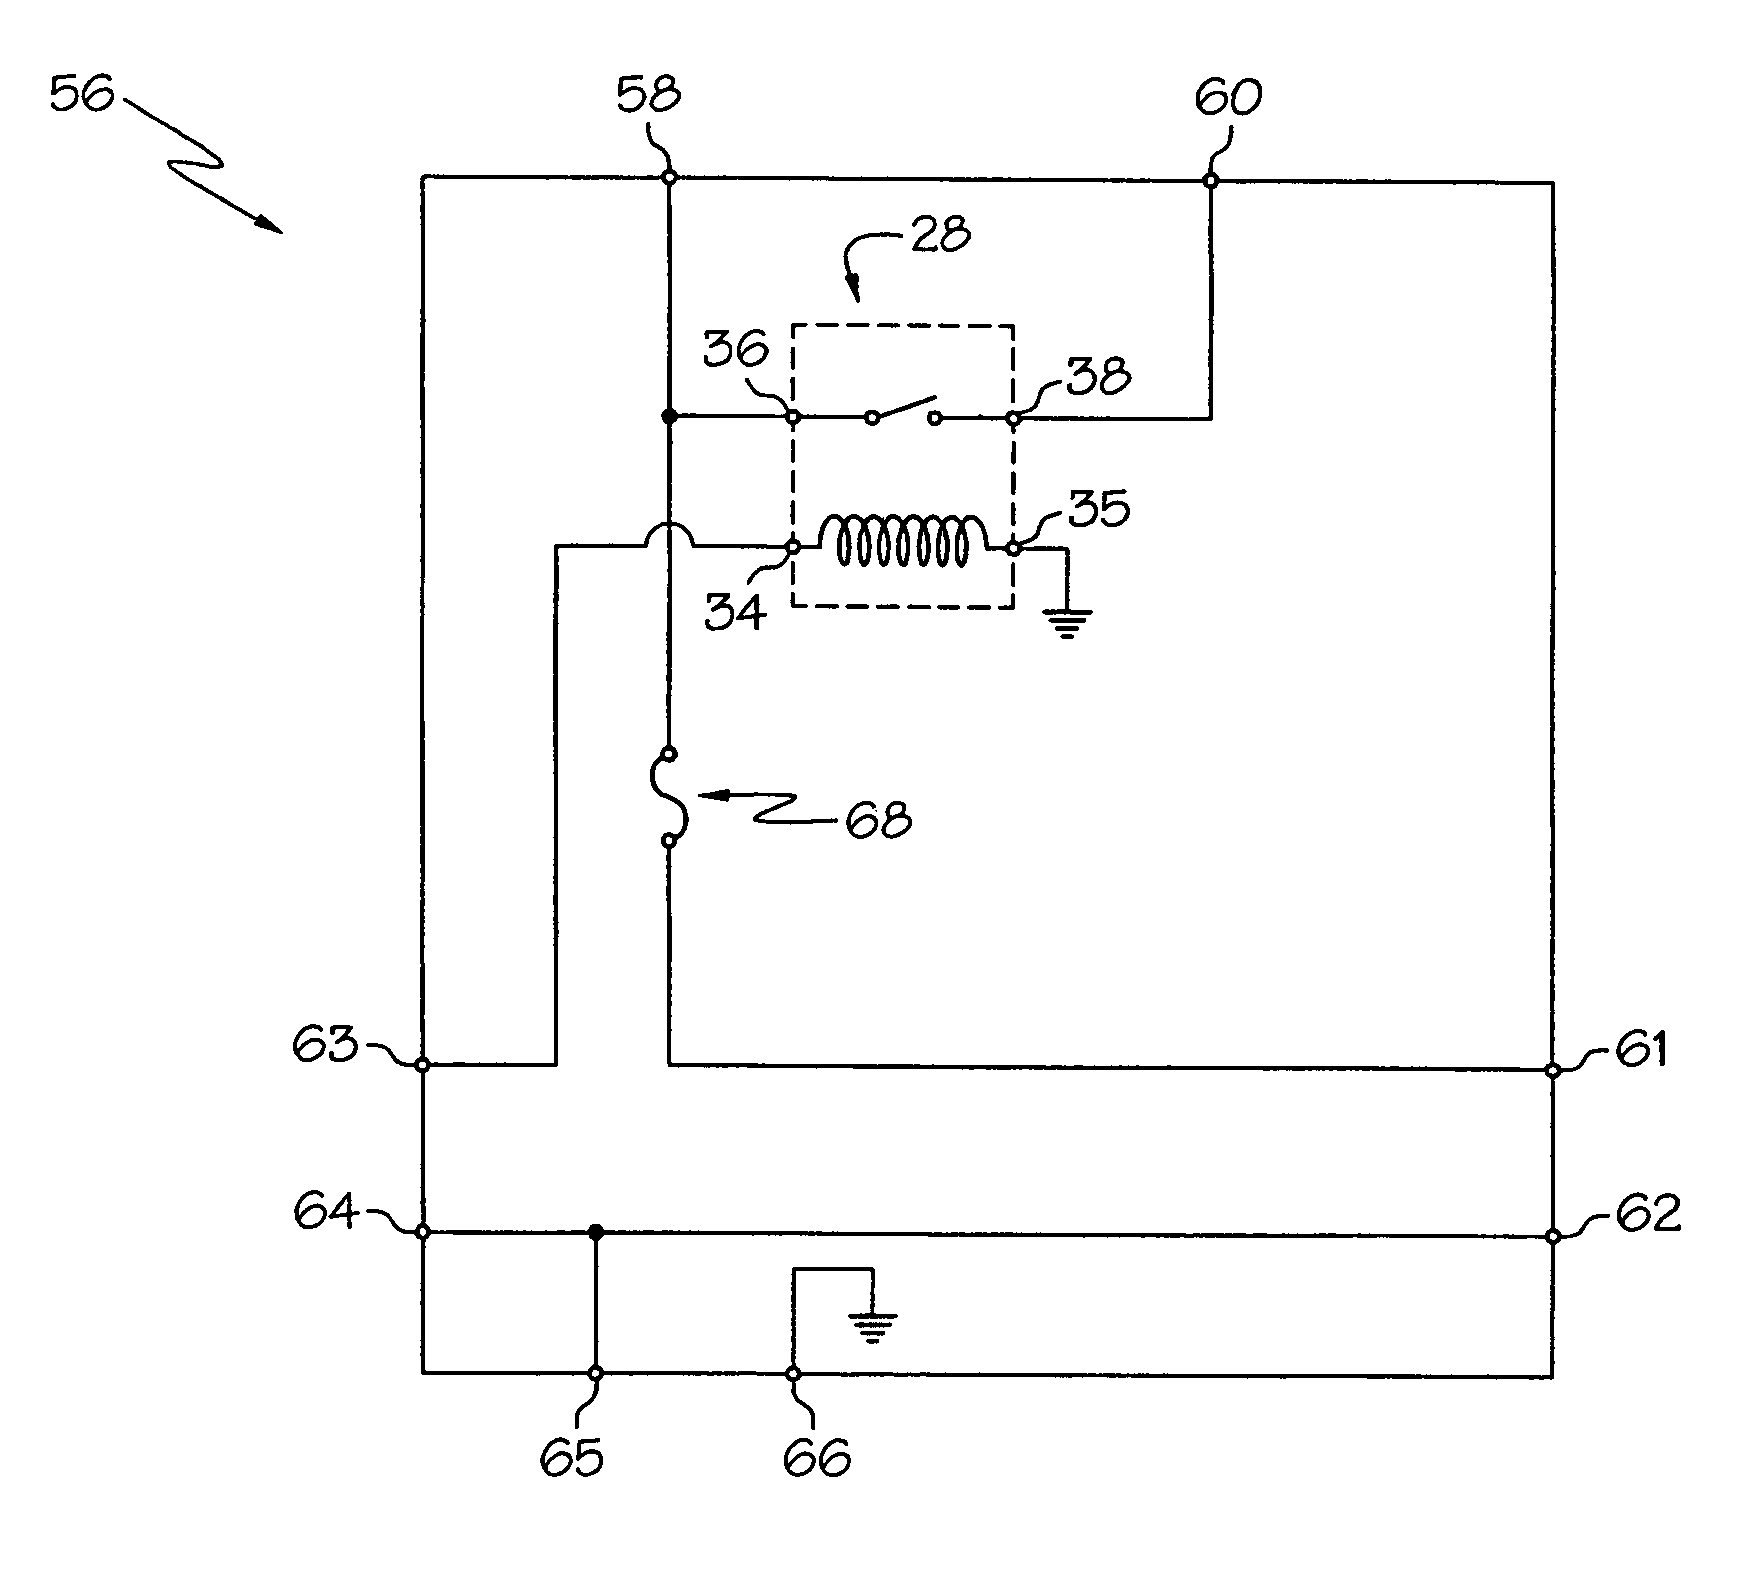 Power equipment apparatus having engine with electric starter motor and manual starter mechanism